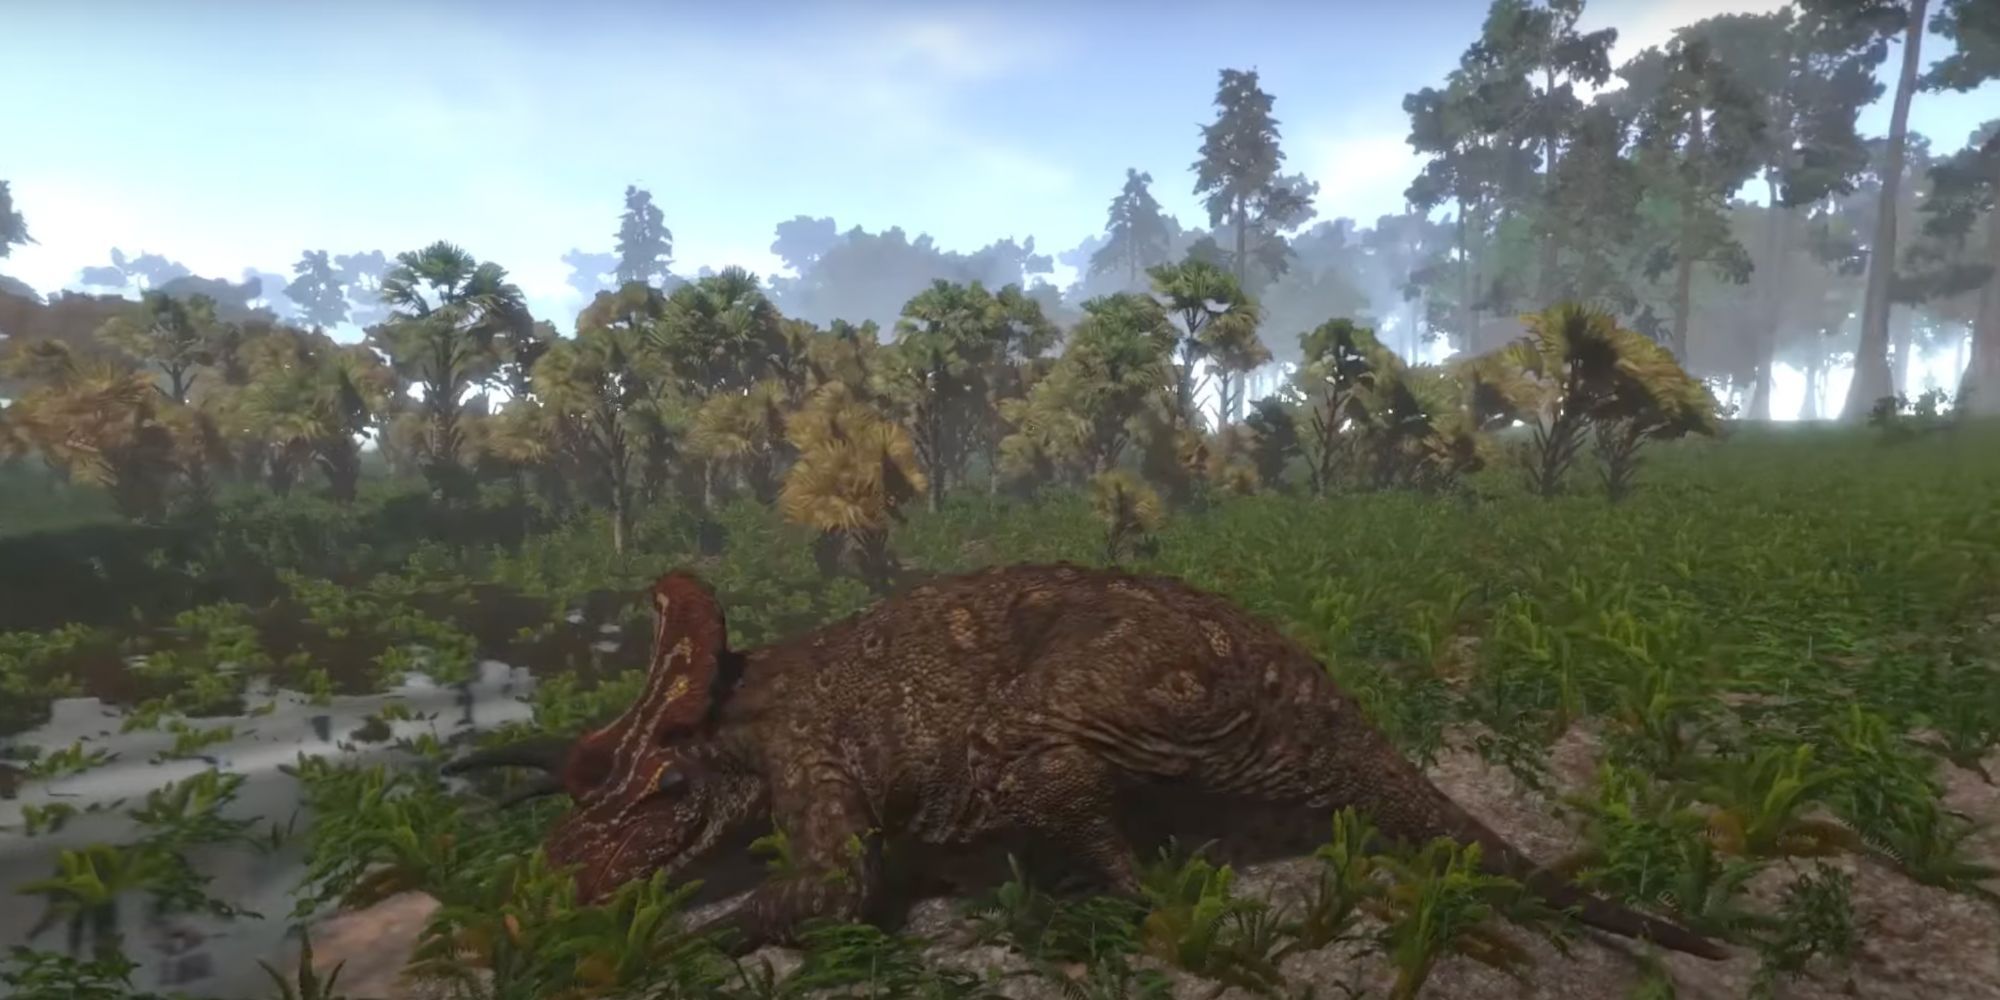 Image of a dinosaur from Saurian, sleep in a patch of grass